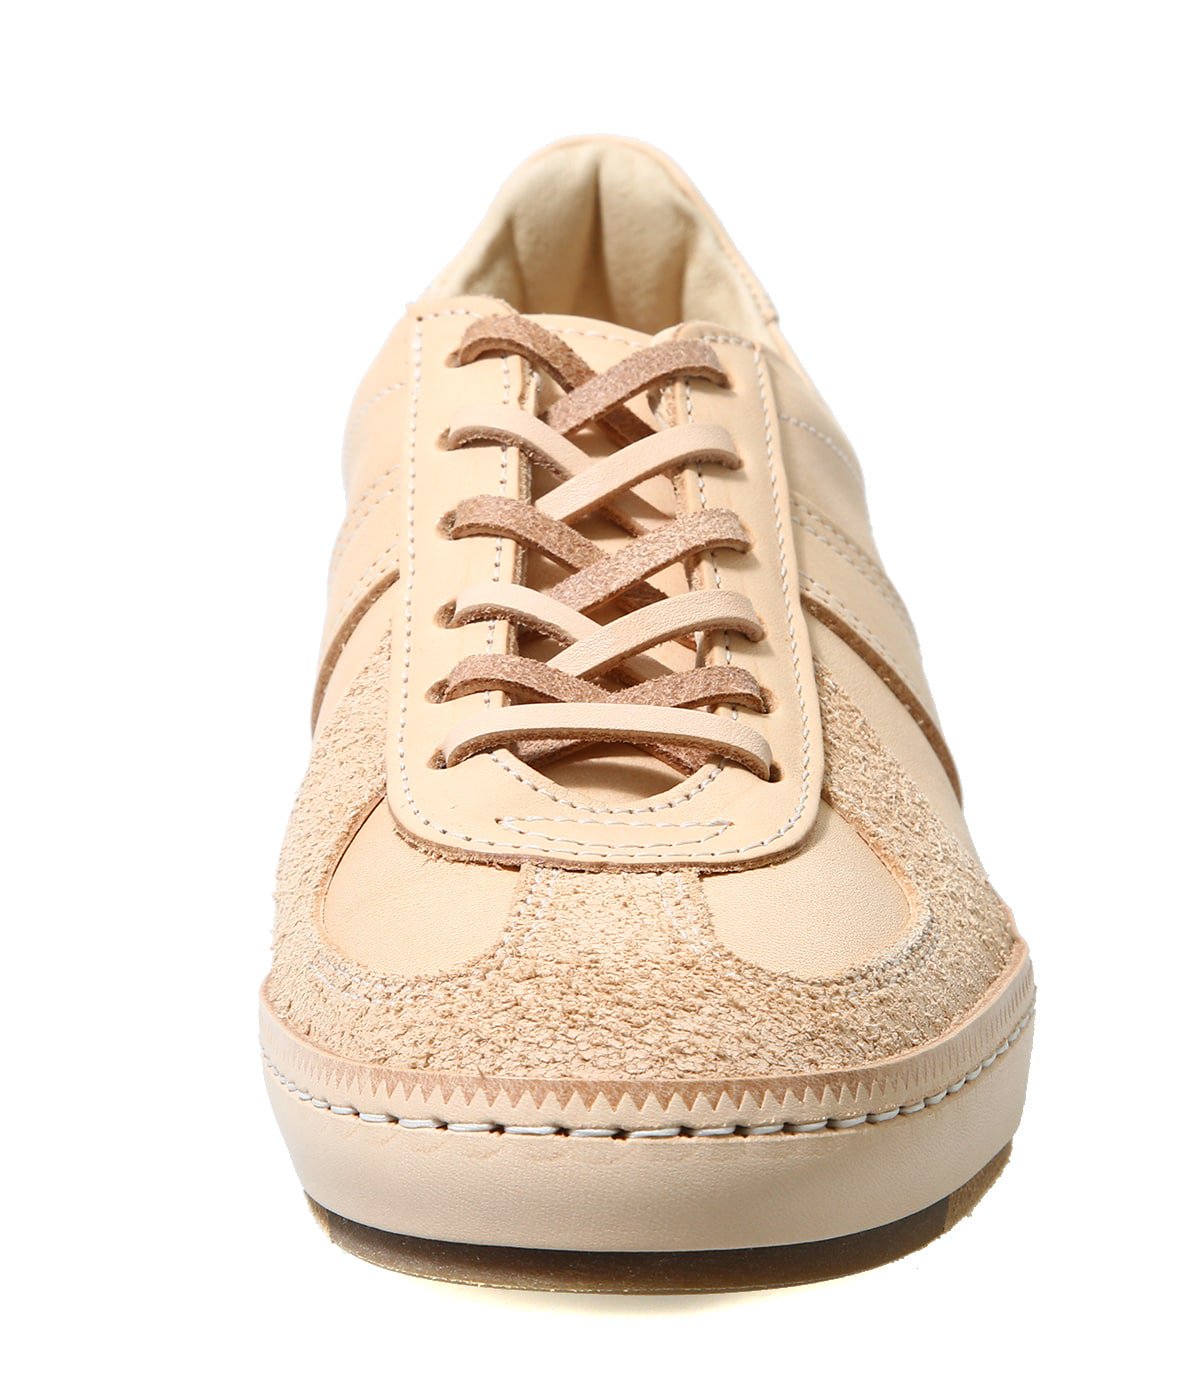 Hender Scheme(エンダースキーマ) manual industrial products 05 